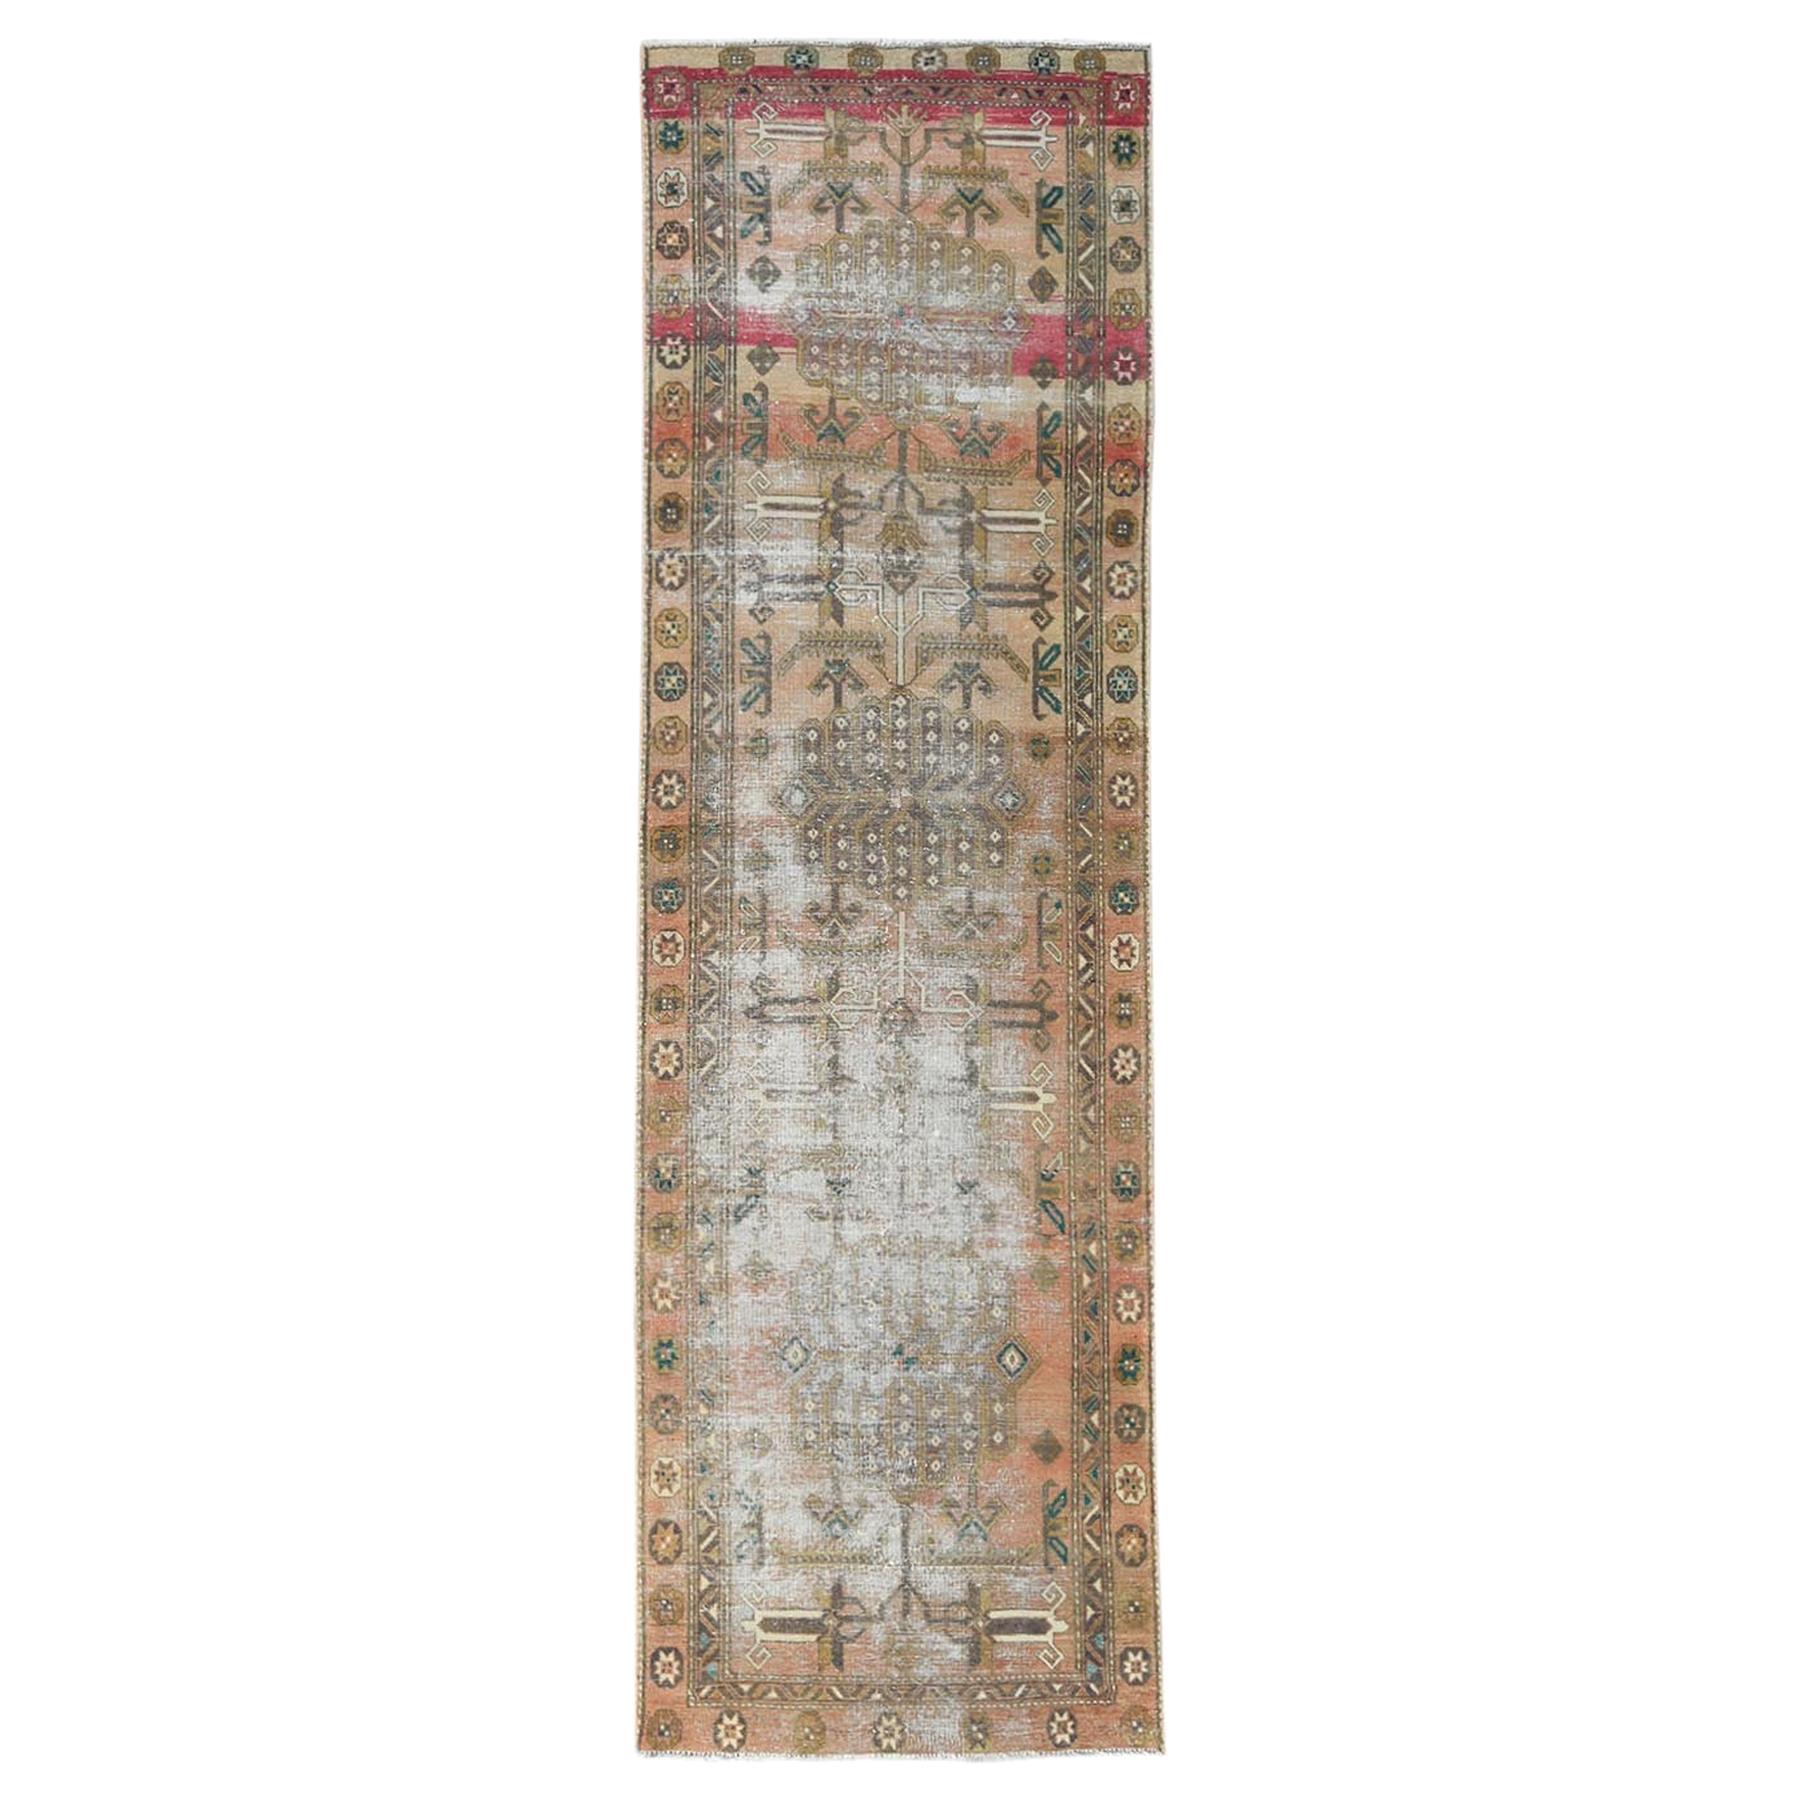 Semi Antique Apricot-Peach Colors Persian Tabriz Worn Down Hand Knotted Wool Rug